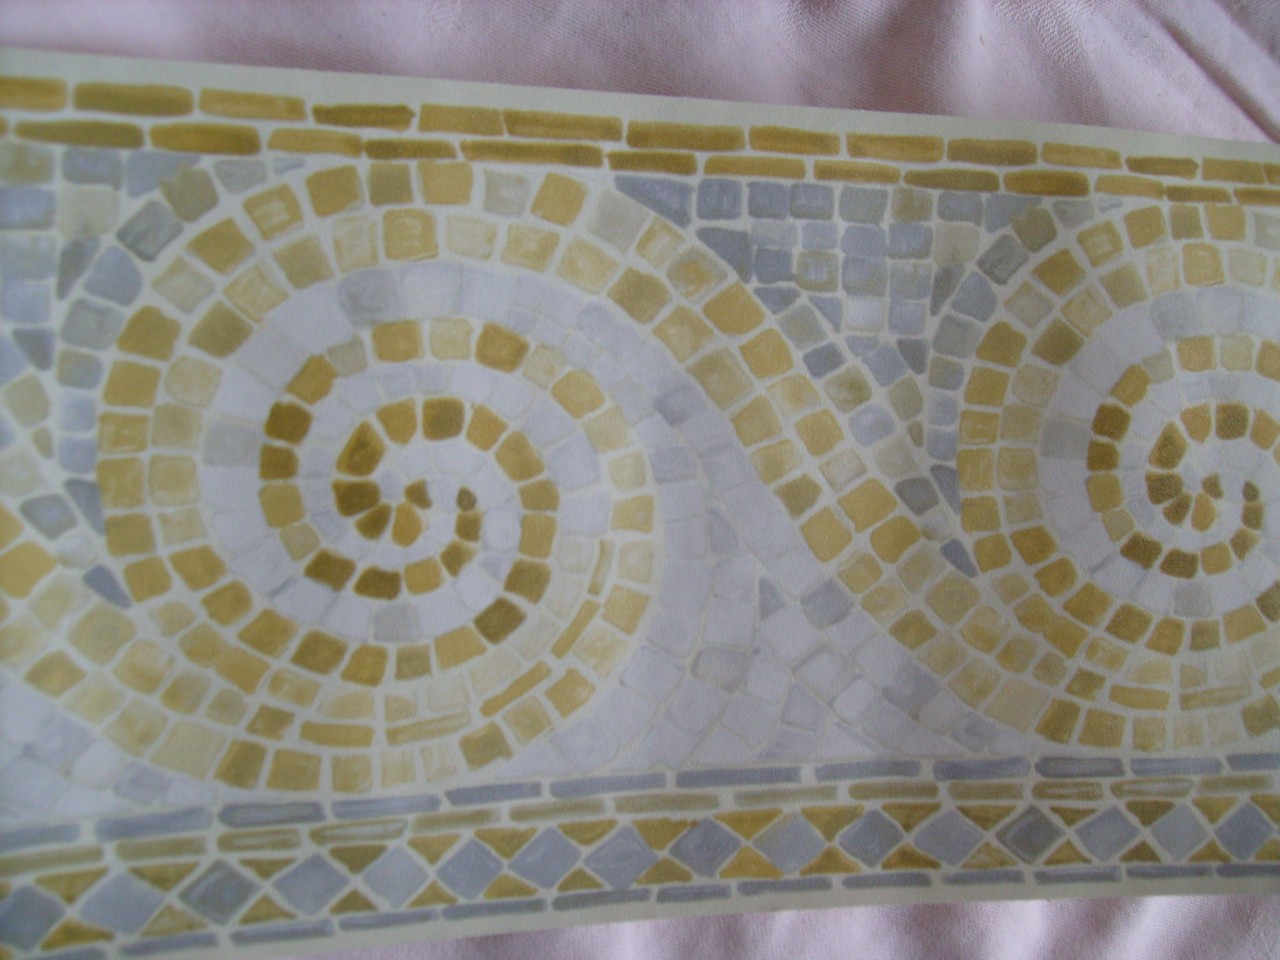 Details about MOSAIC GOLD YELLOW GREY COLOROLL WALLPAPER BORDERS BN